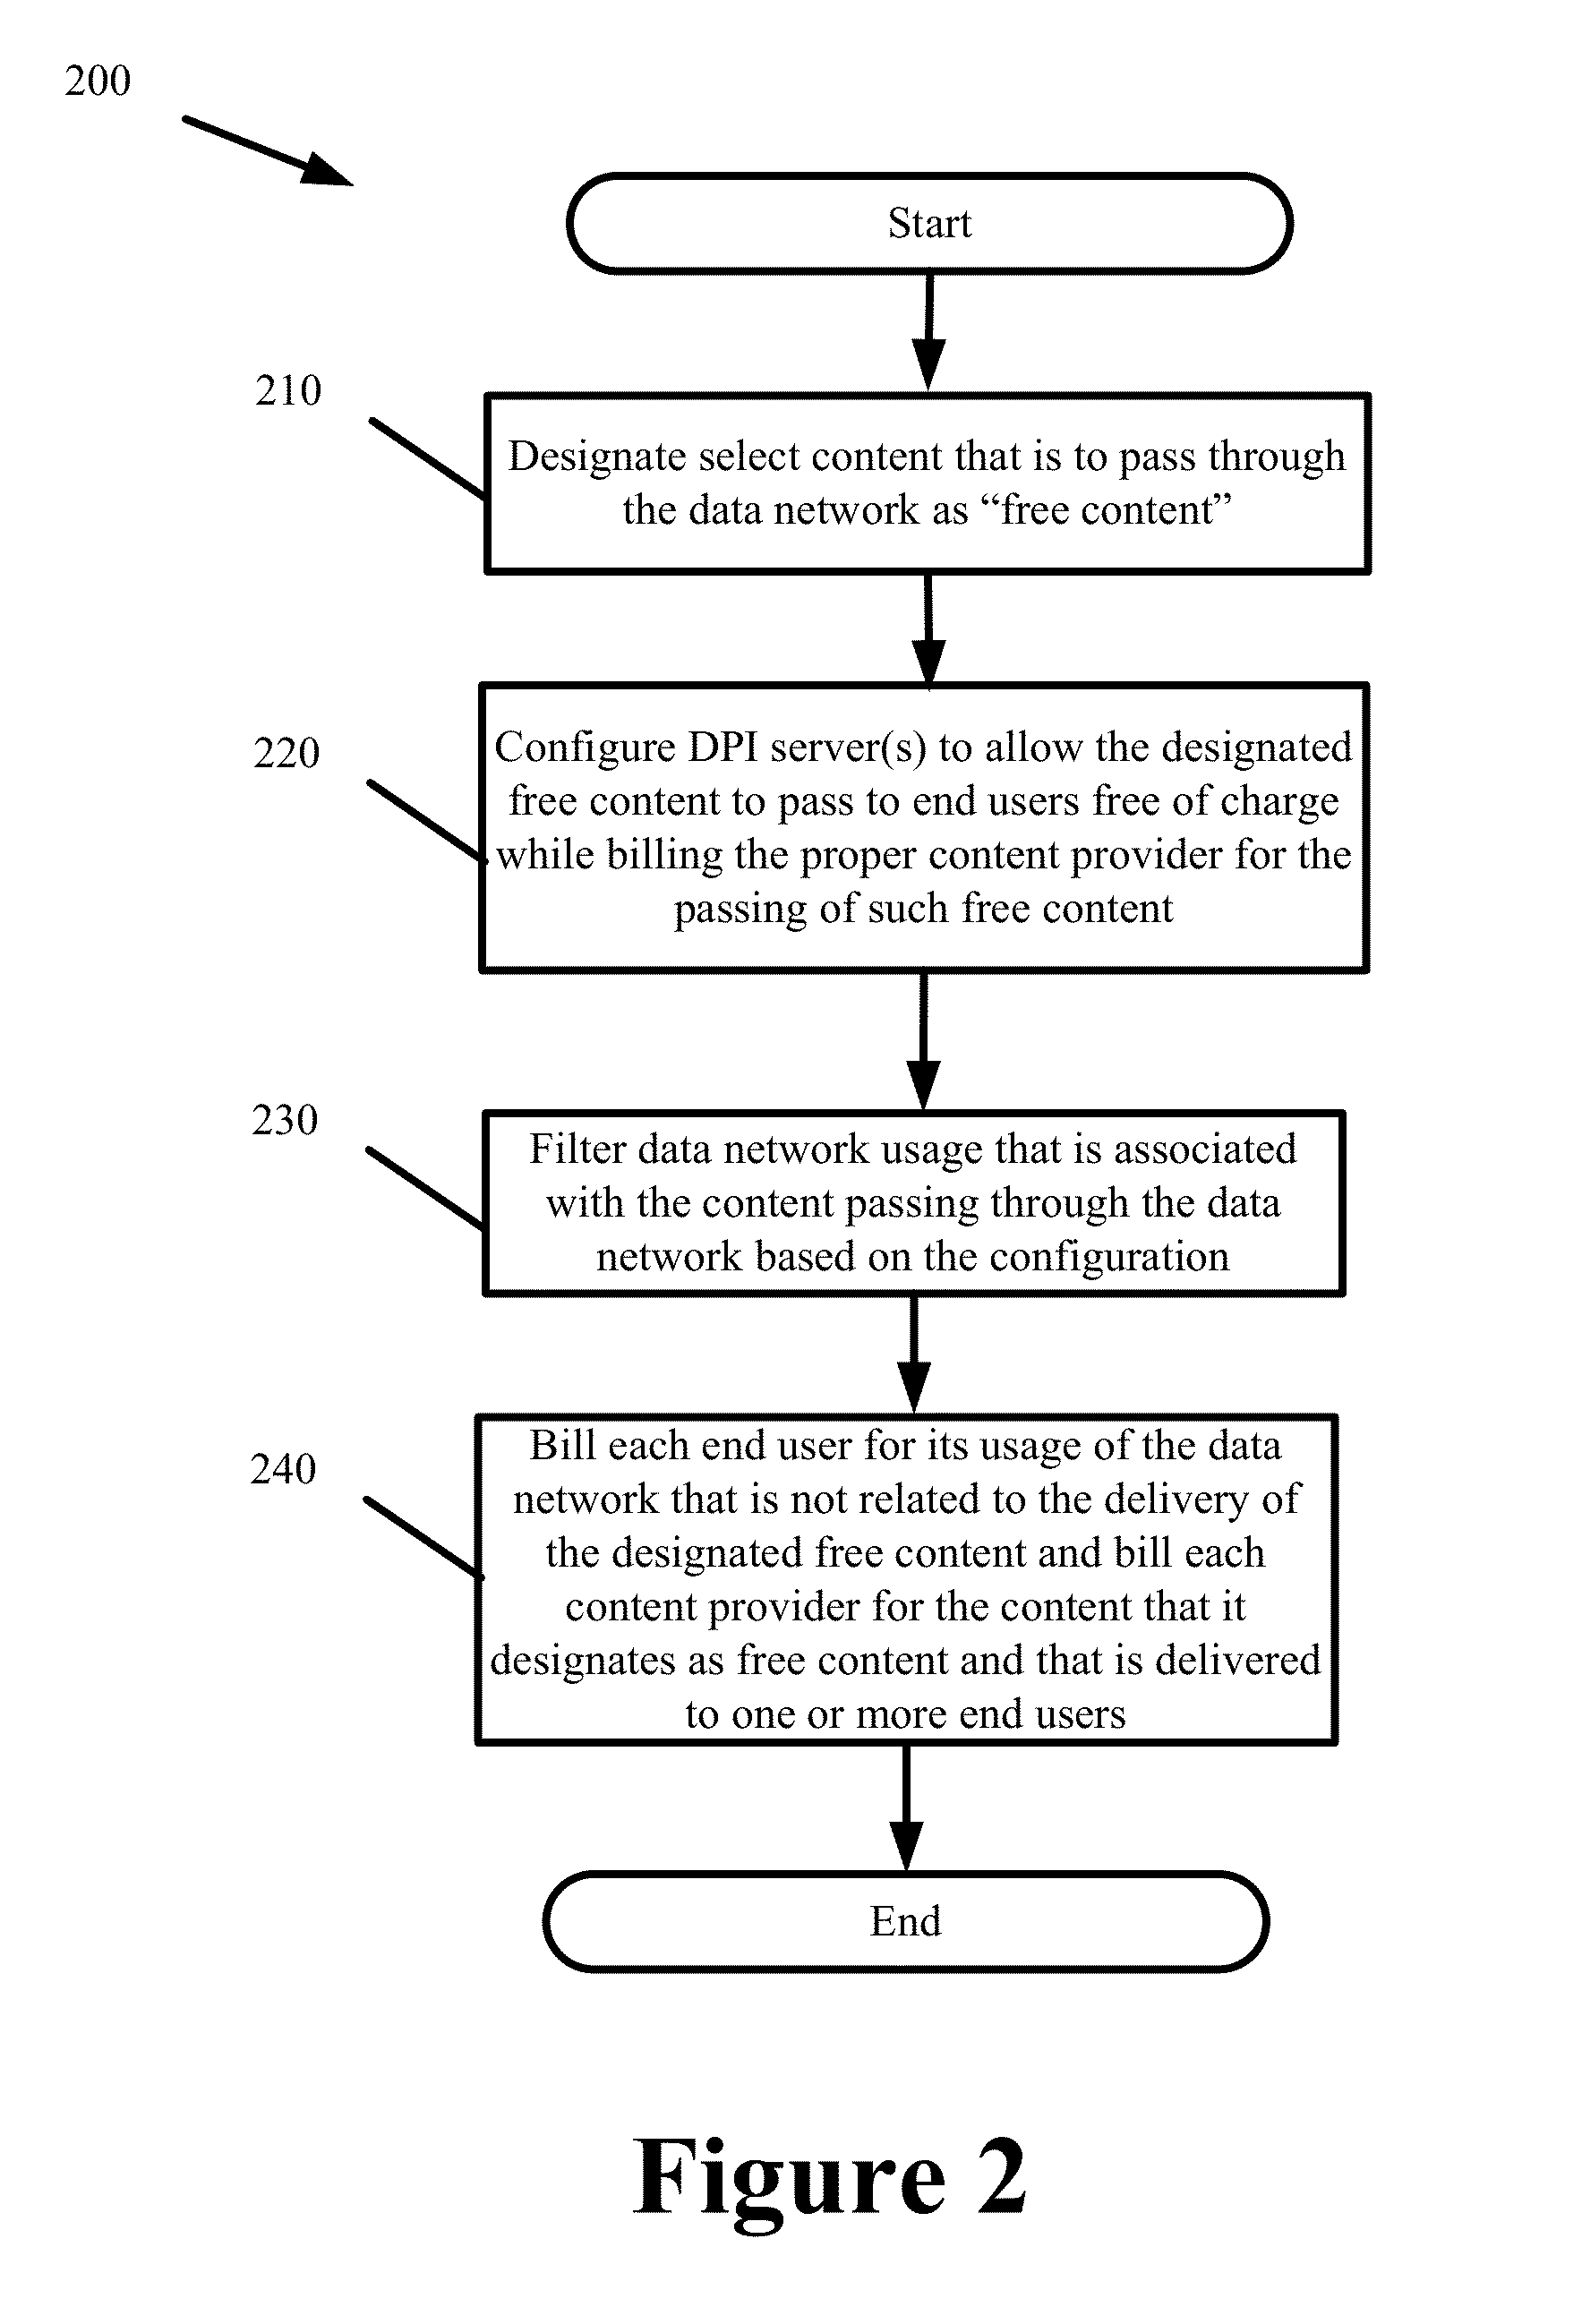 Systems and methods for billing content providers for designated content delivered over a data network